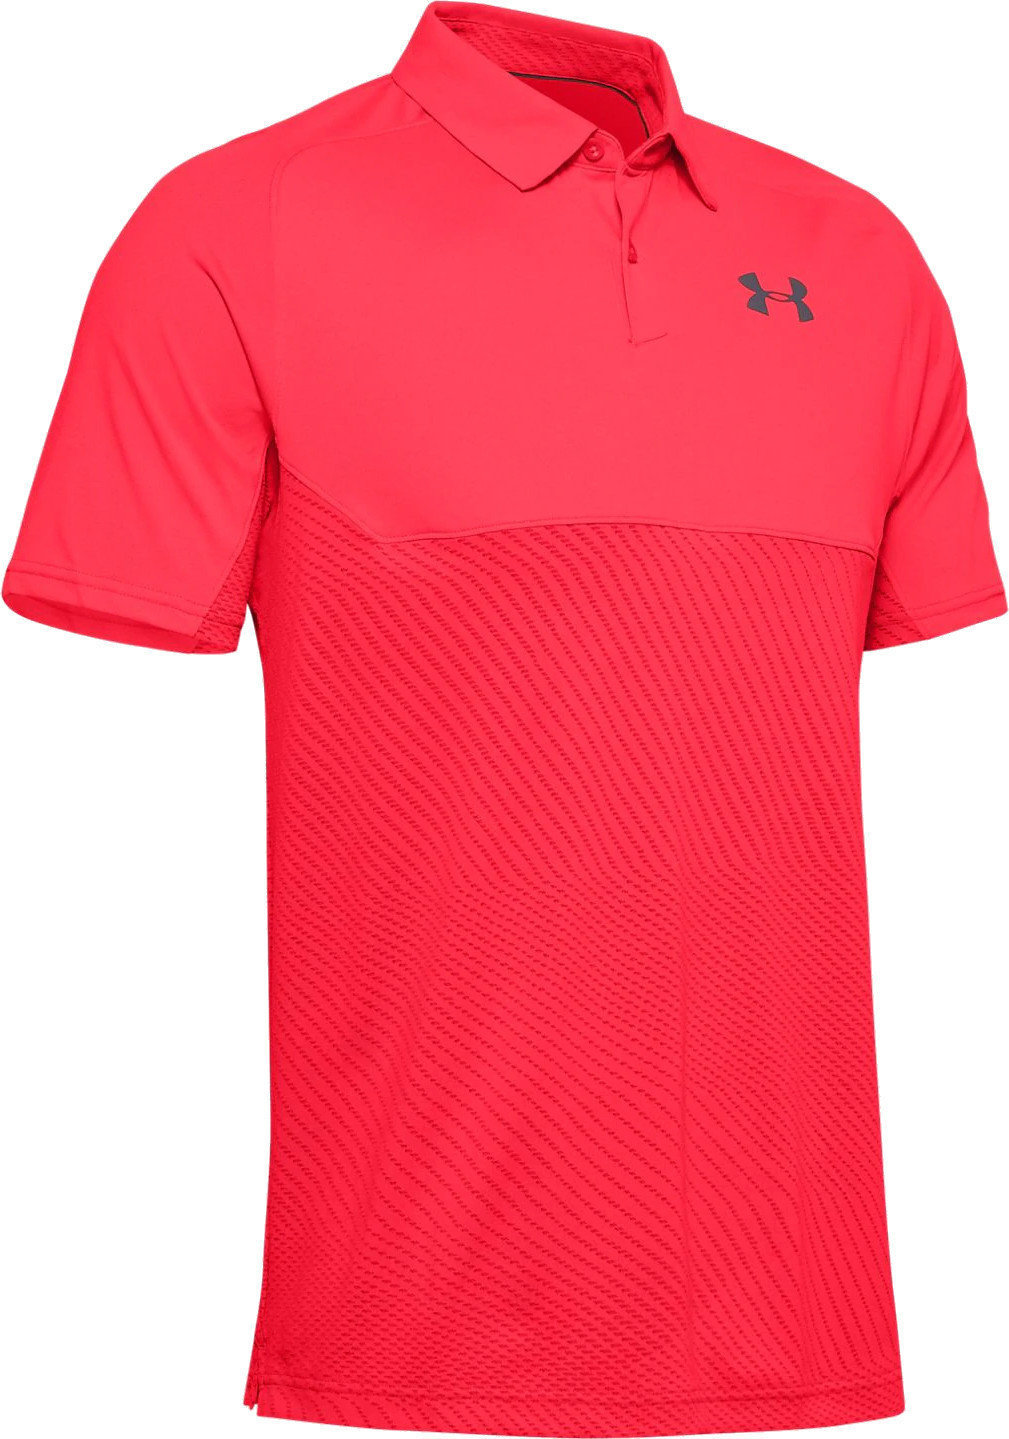 Polo Shirt Under Armour Tour Tips Blocked Beta Red S